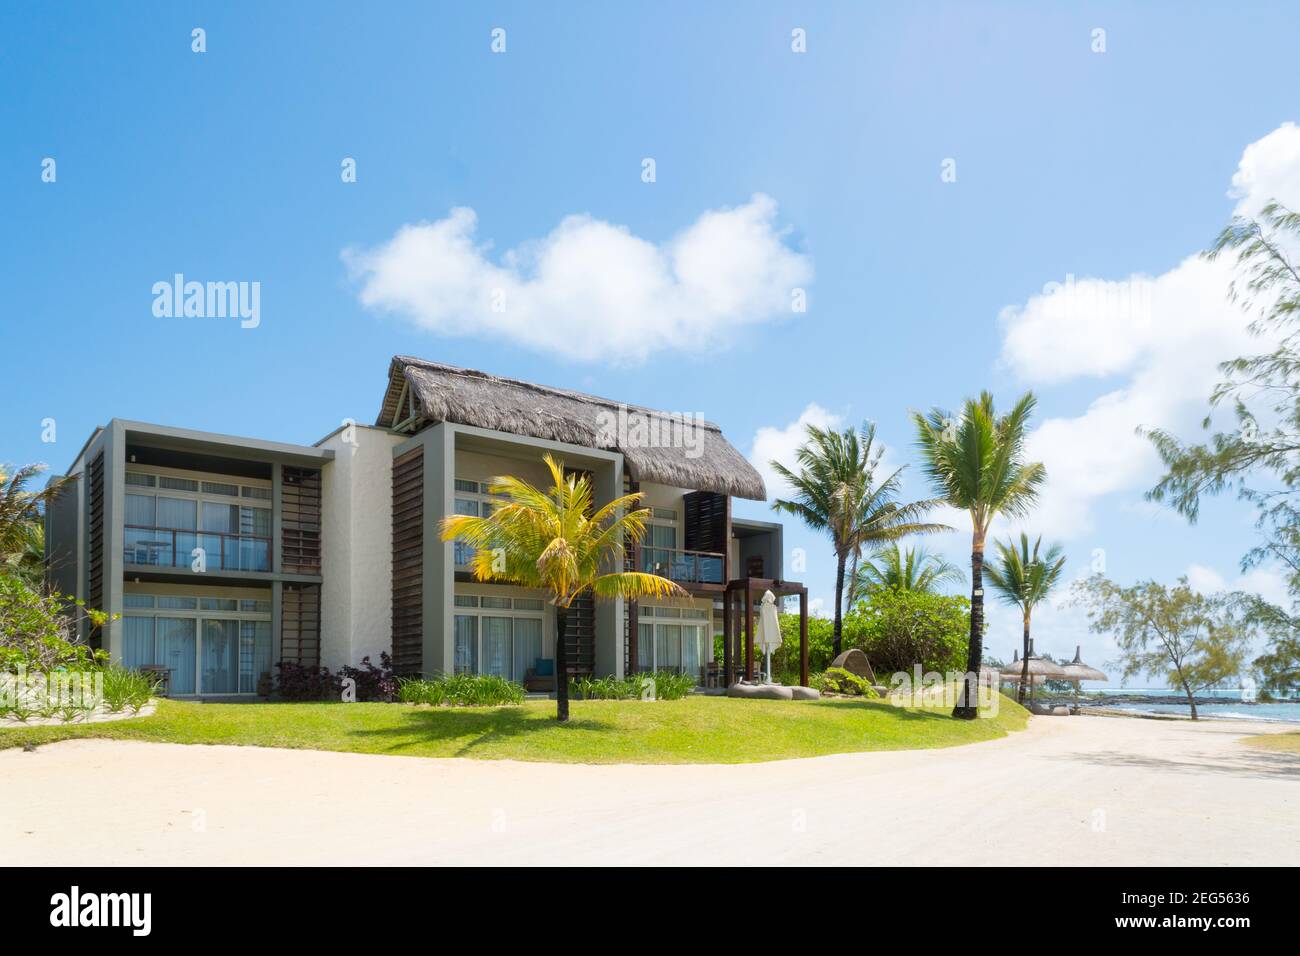 Resort hotel accommodation on the beach at Mauritius which is a tropical island Stock Photo